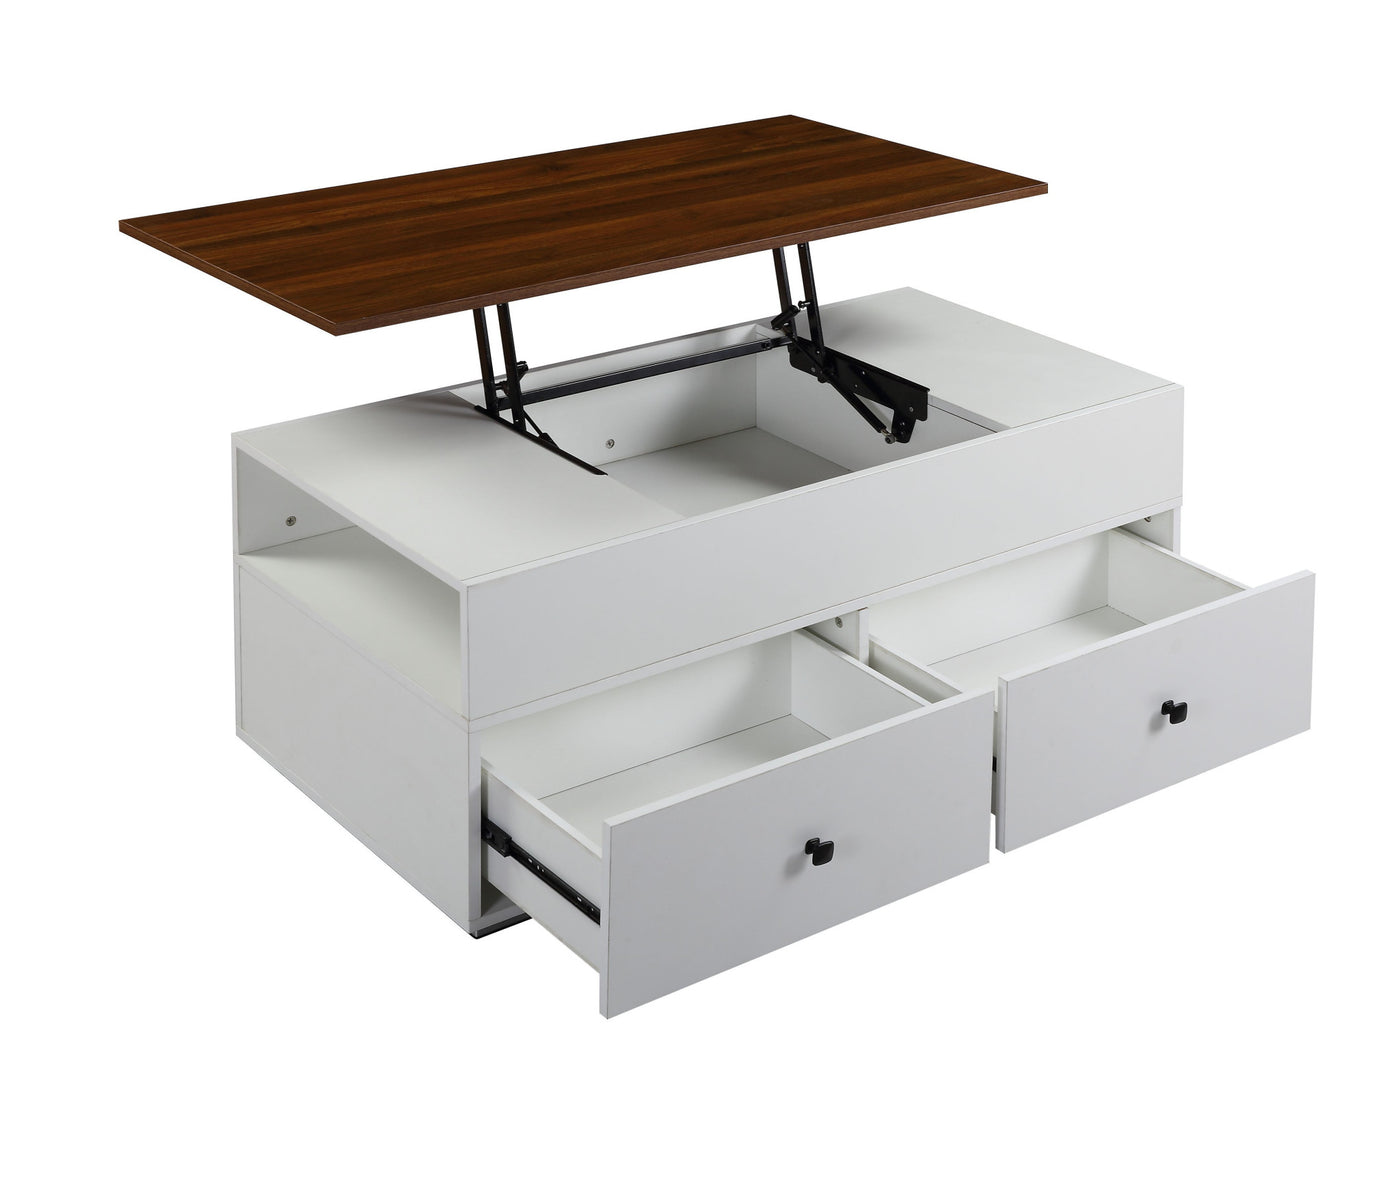 46" White And Walnut Melamine Veneer And Manufactured Wood Rectangular Lift Top Coffee Table With Two Drawers And Shelf